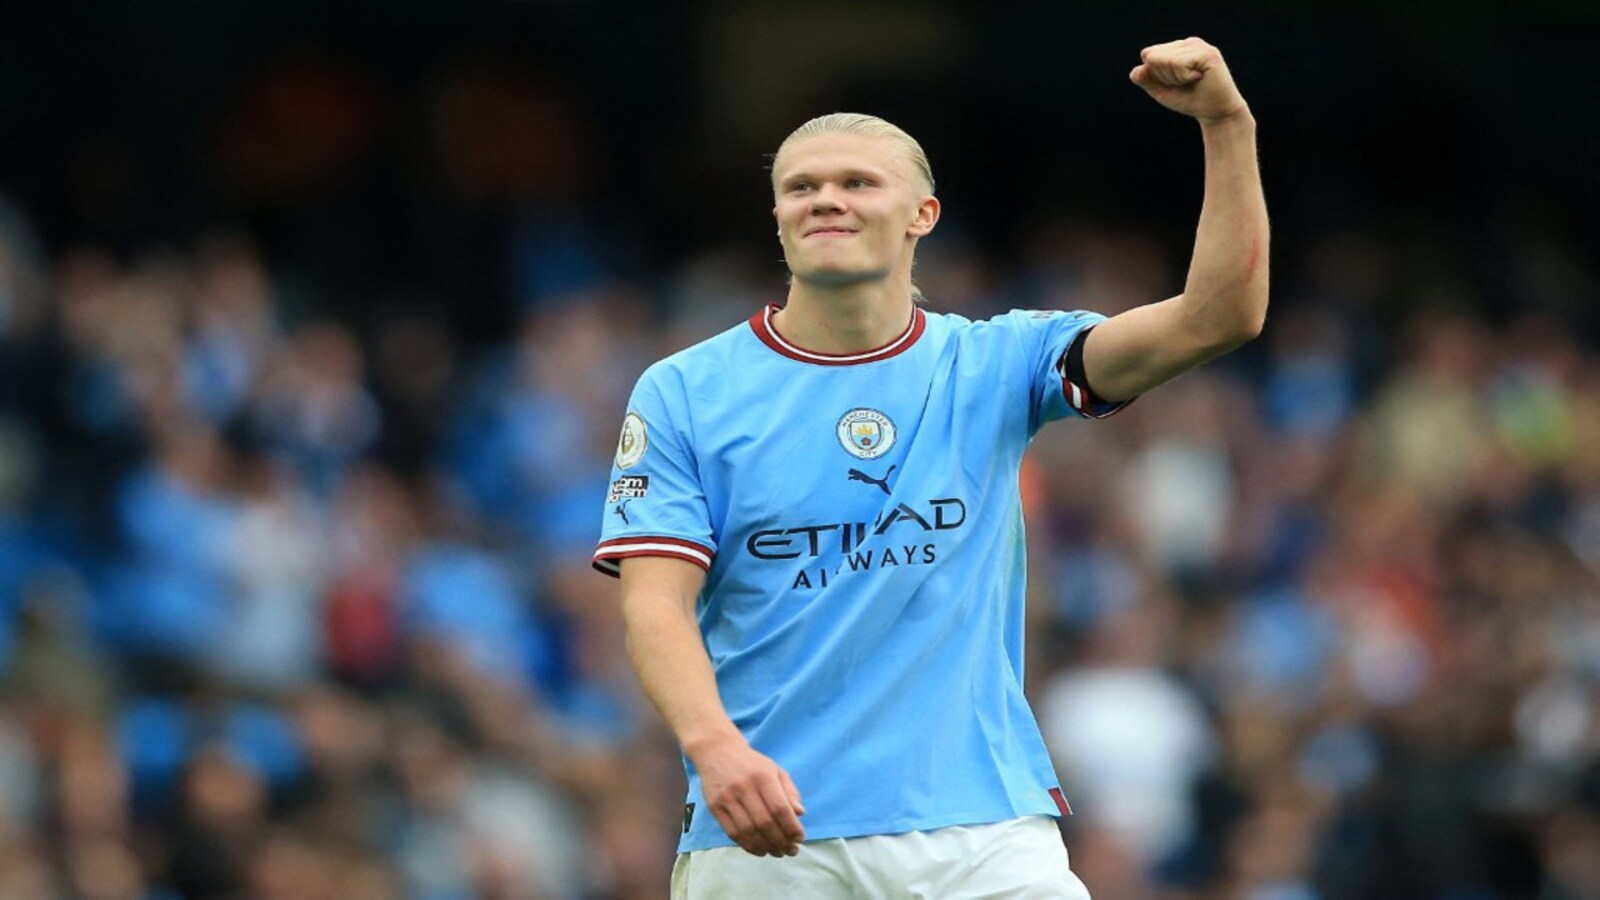 Non-League club makes hilarious move for Manchester City star Erling Haaland